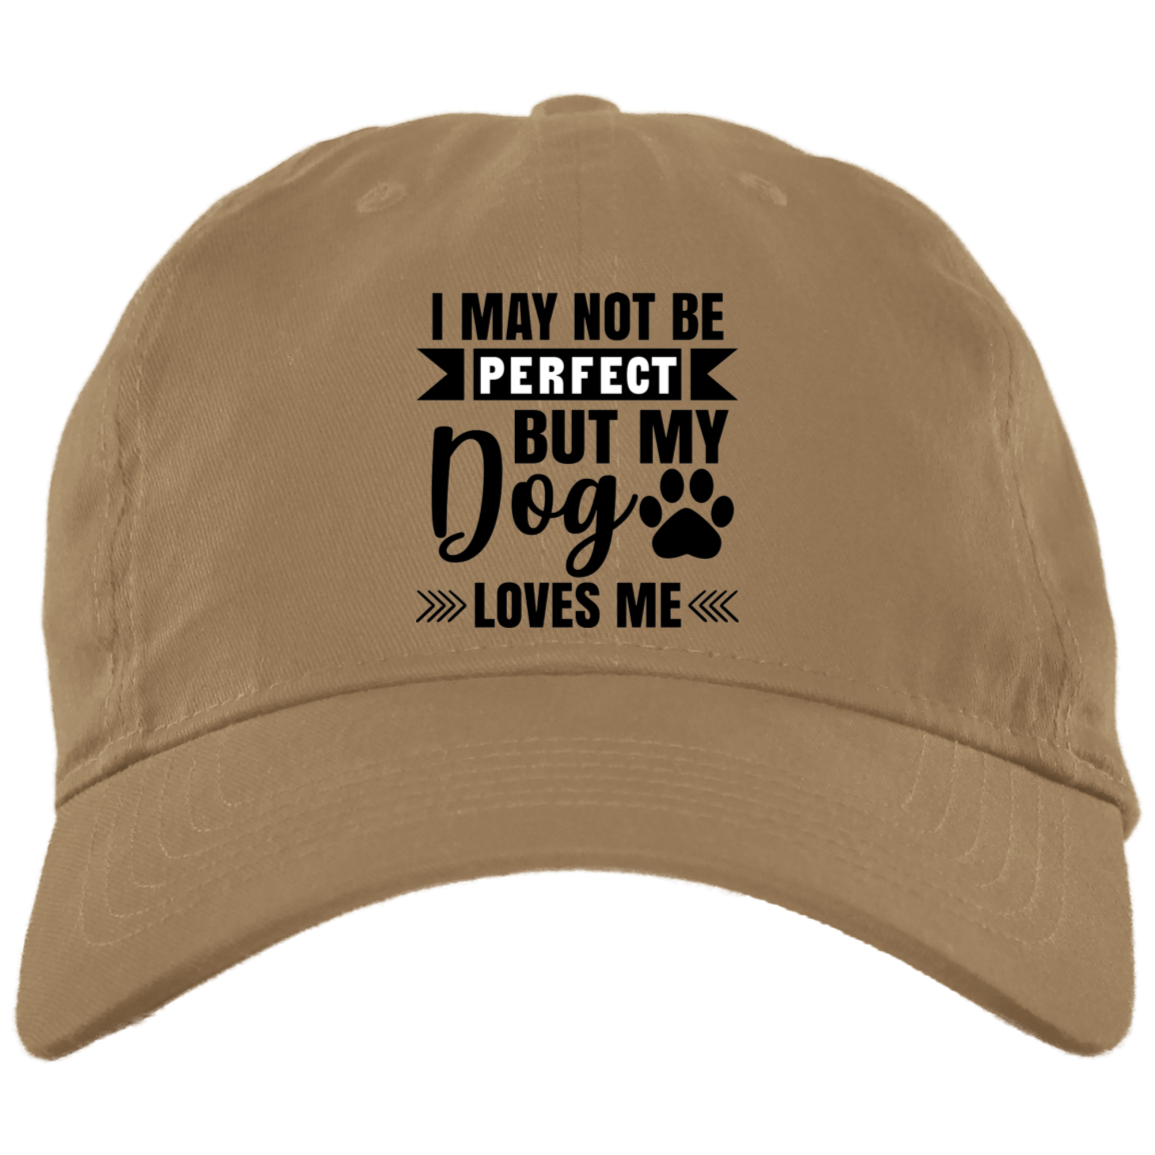 I May Not Be Perfect But My Dogs Love Me Embroidered Brushed Twill Unstructured Dad Cap